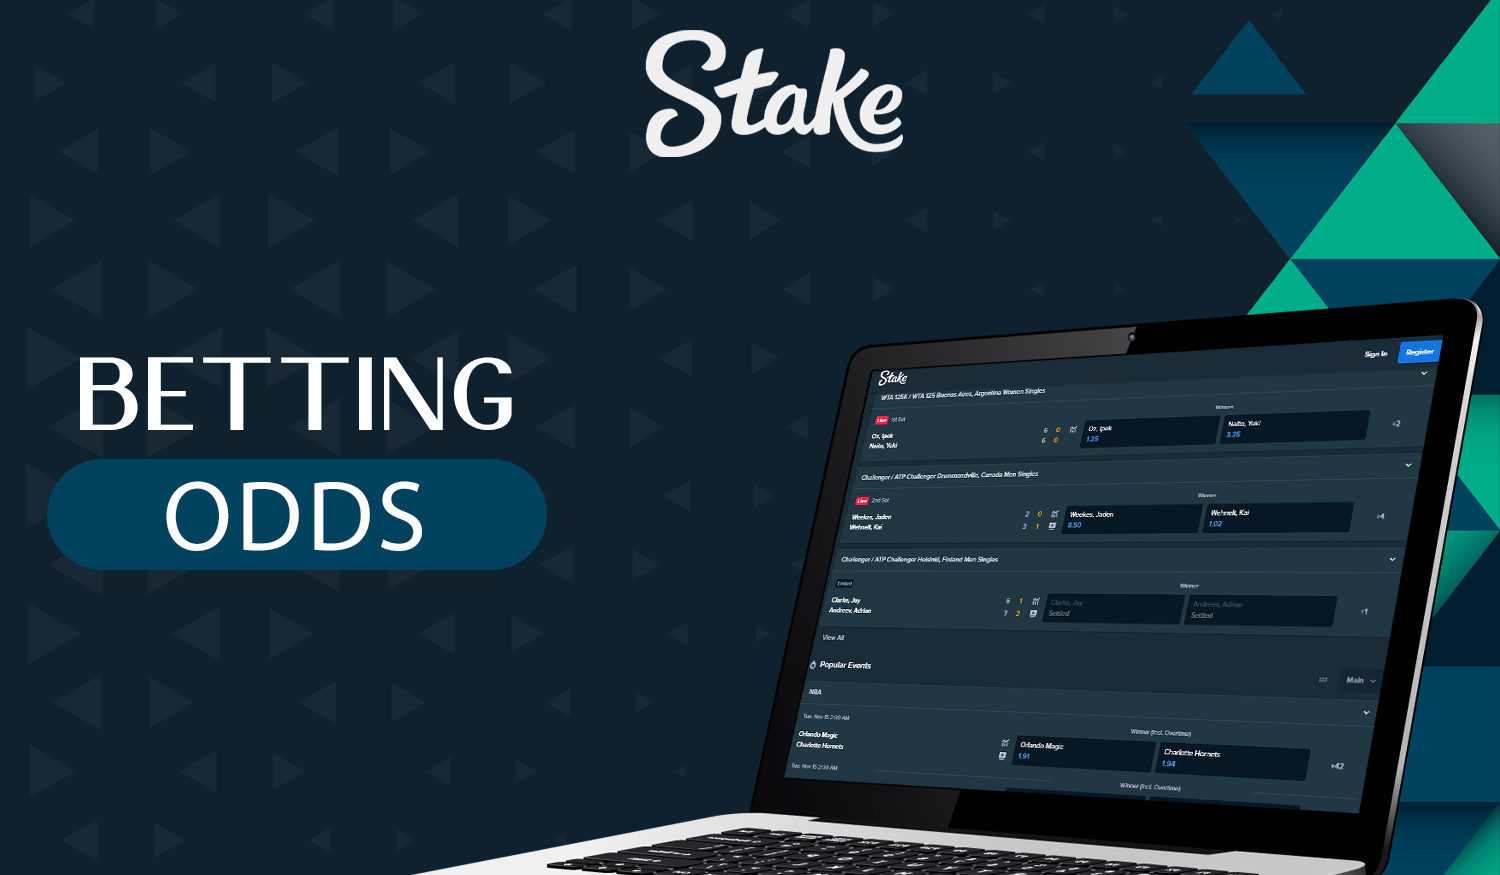 What odds Stake offers for sports betting to Indian users